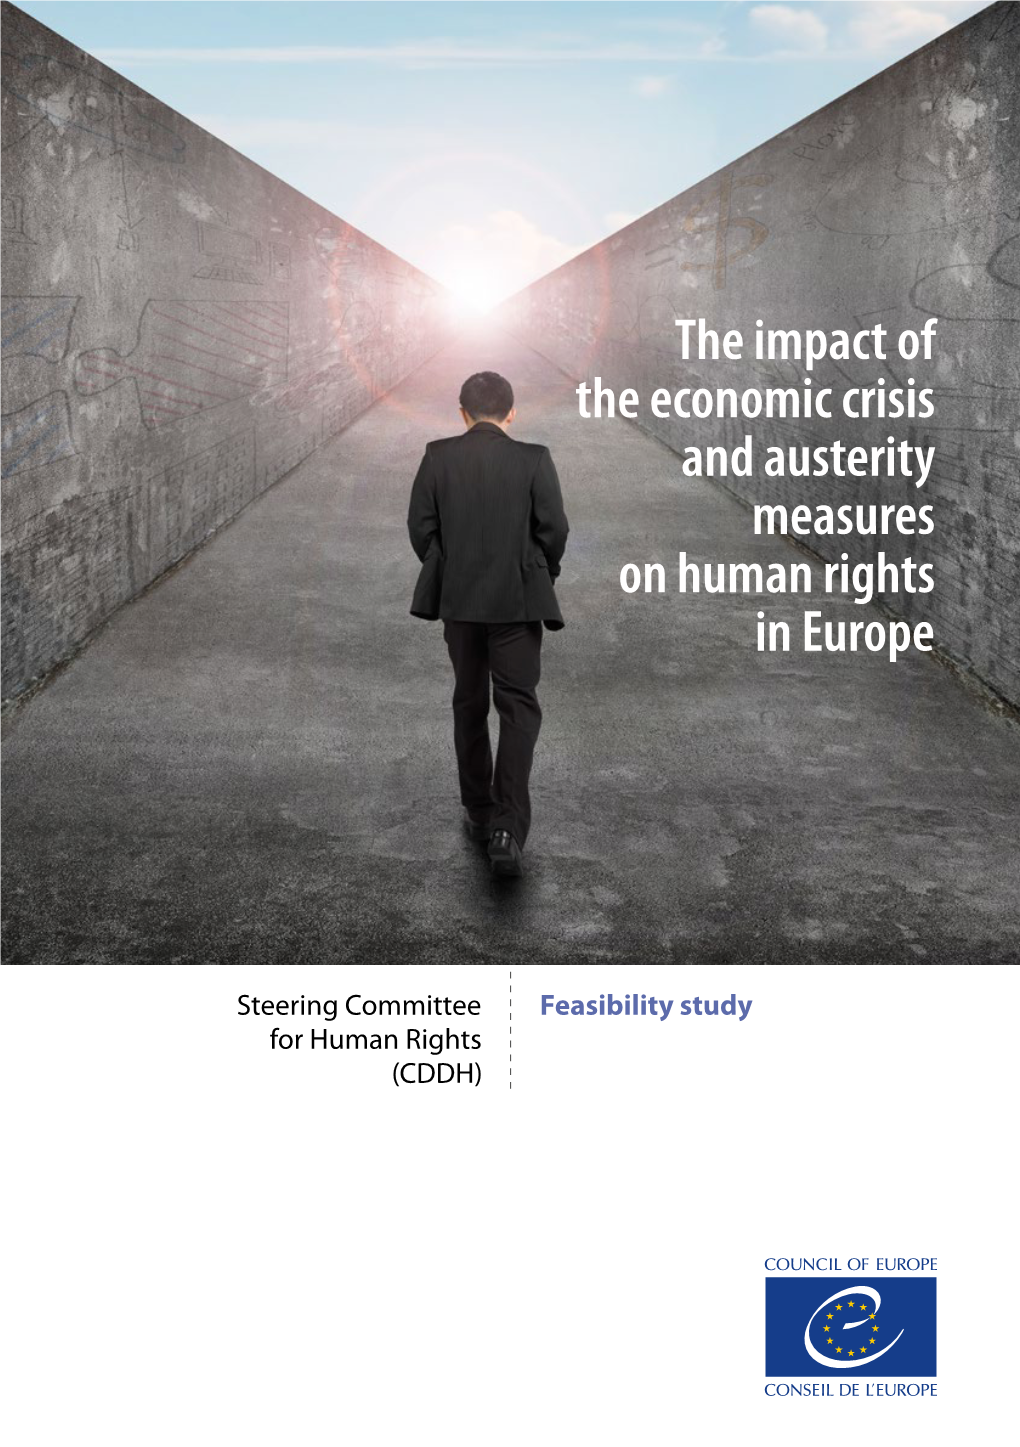 The Impact of the Economic Crisis and Austerity Measures on Human Rights in Europe Feasibility Study